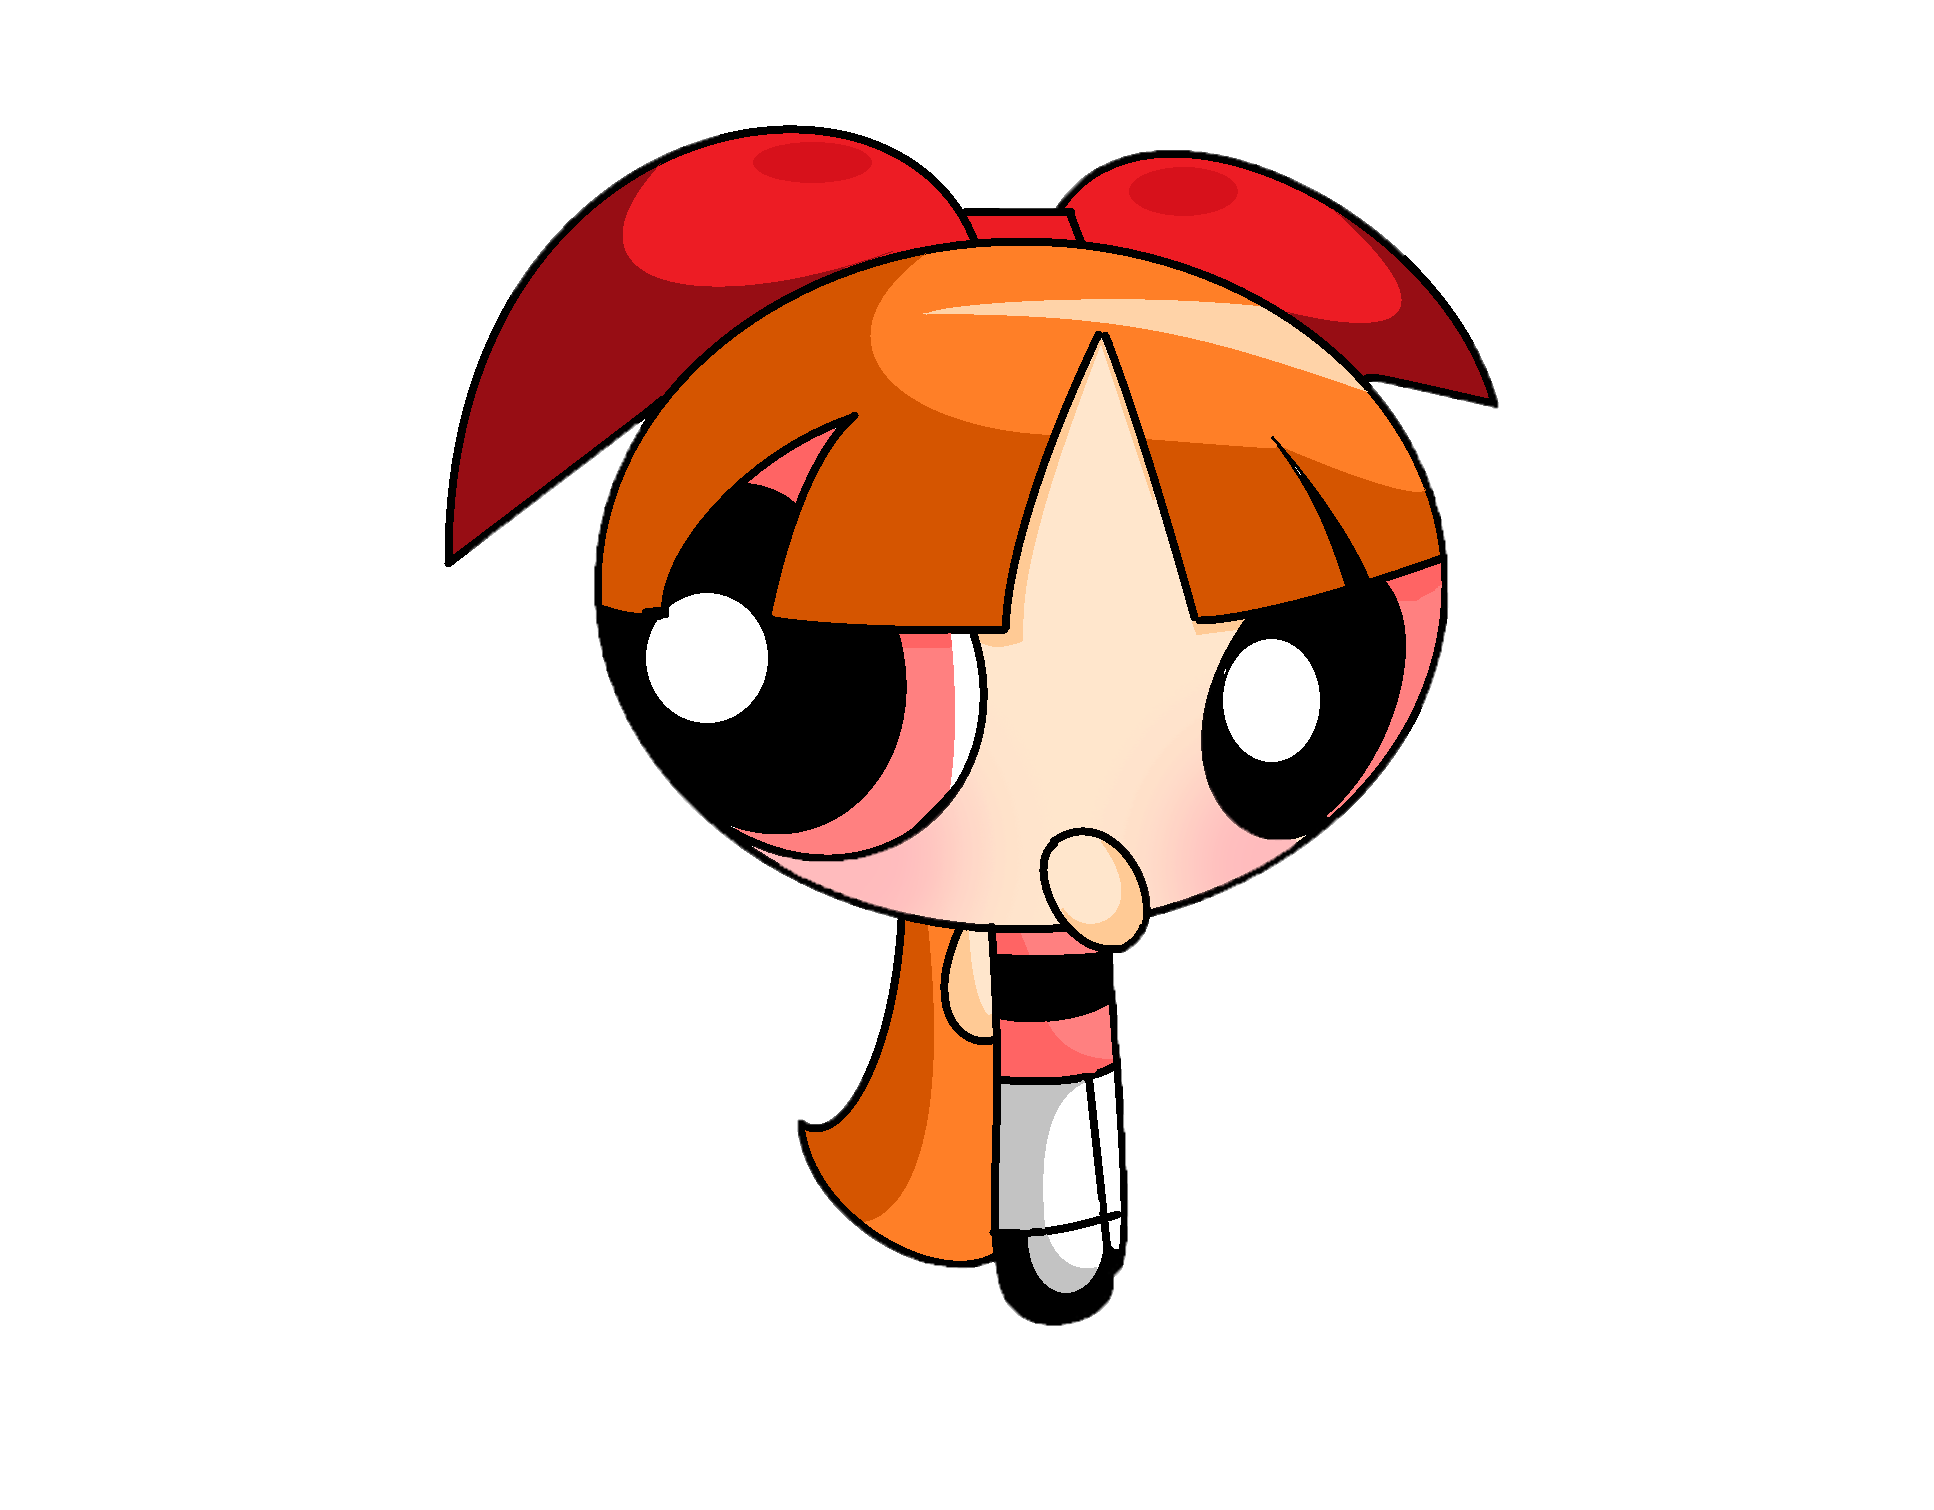 20 Blossom Powerpuff Girls Hd Wallpapers And Backgrounds | Images and ...